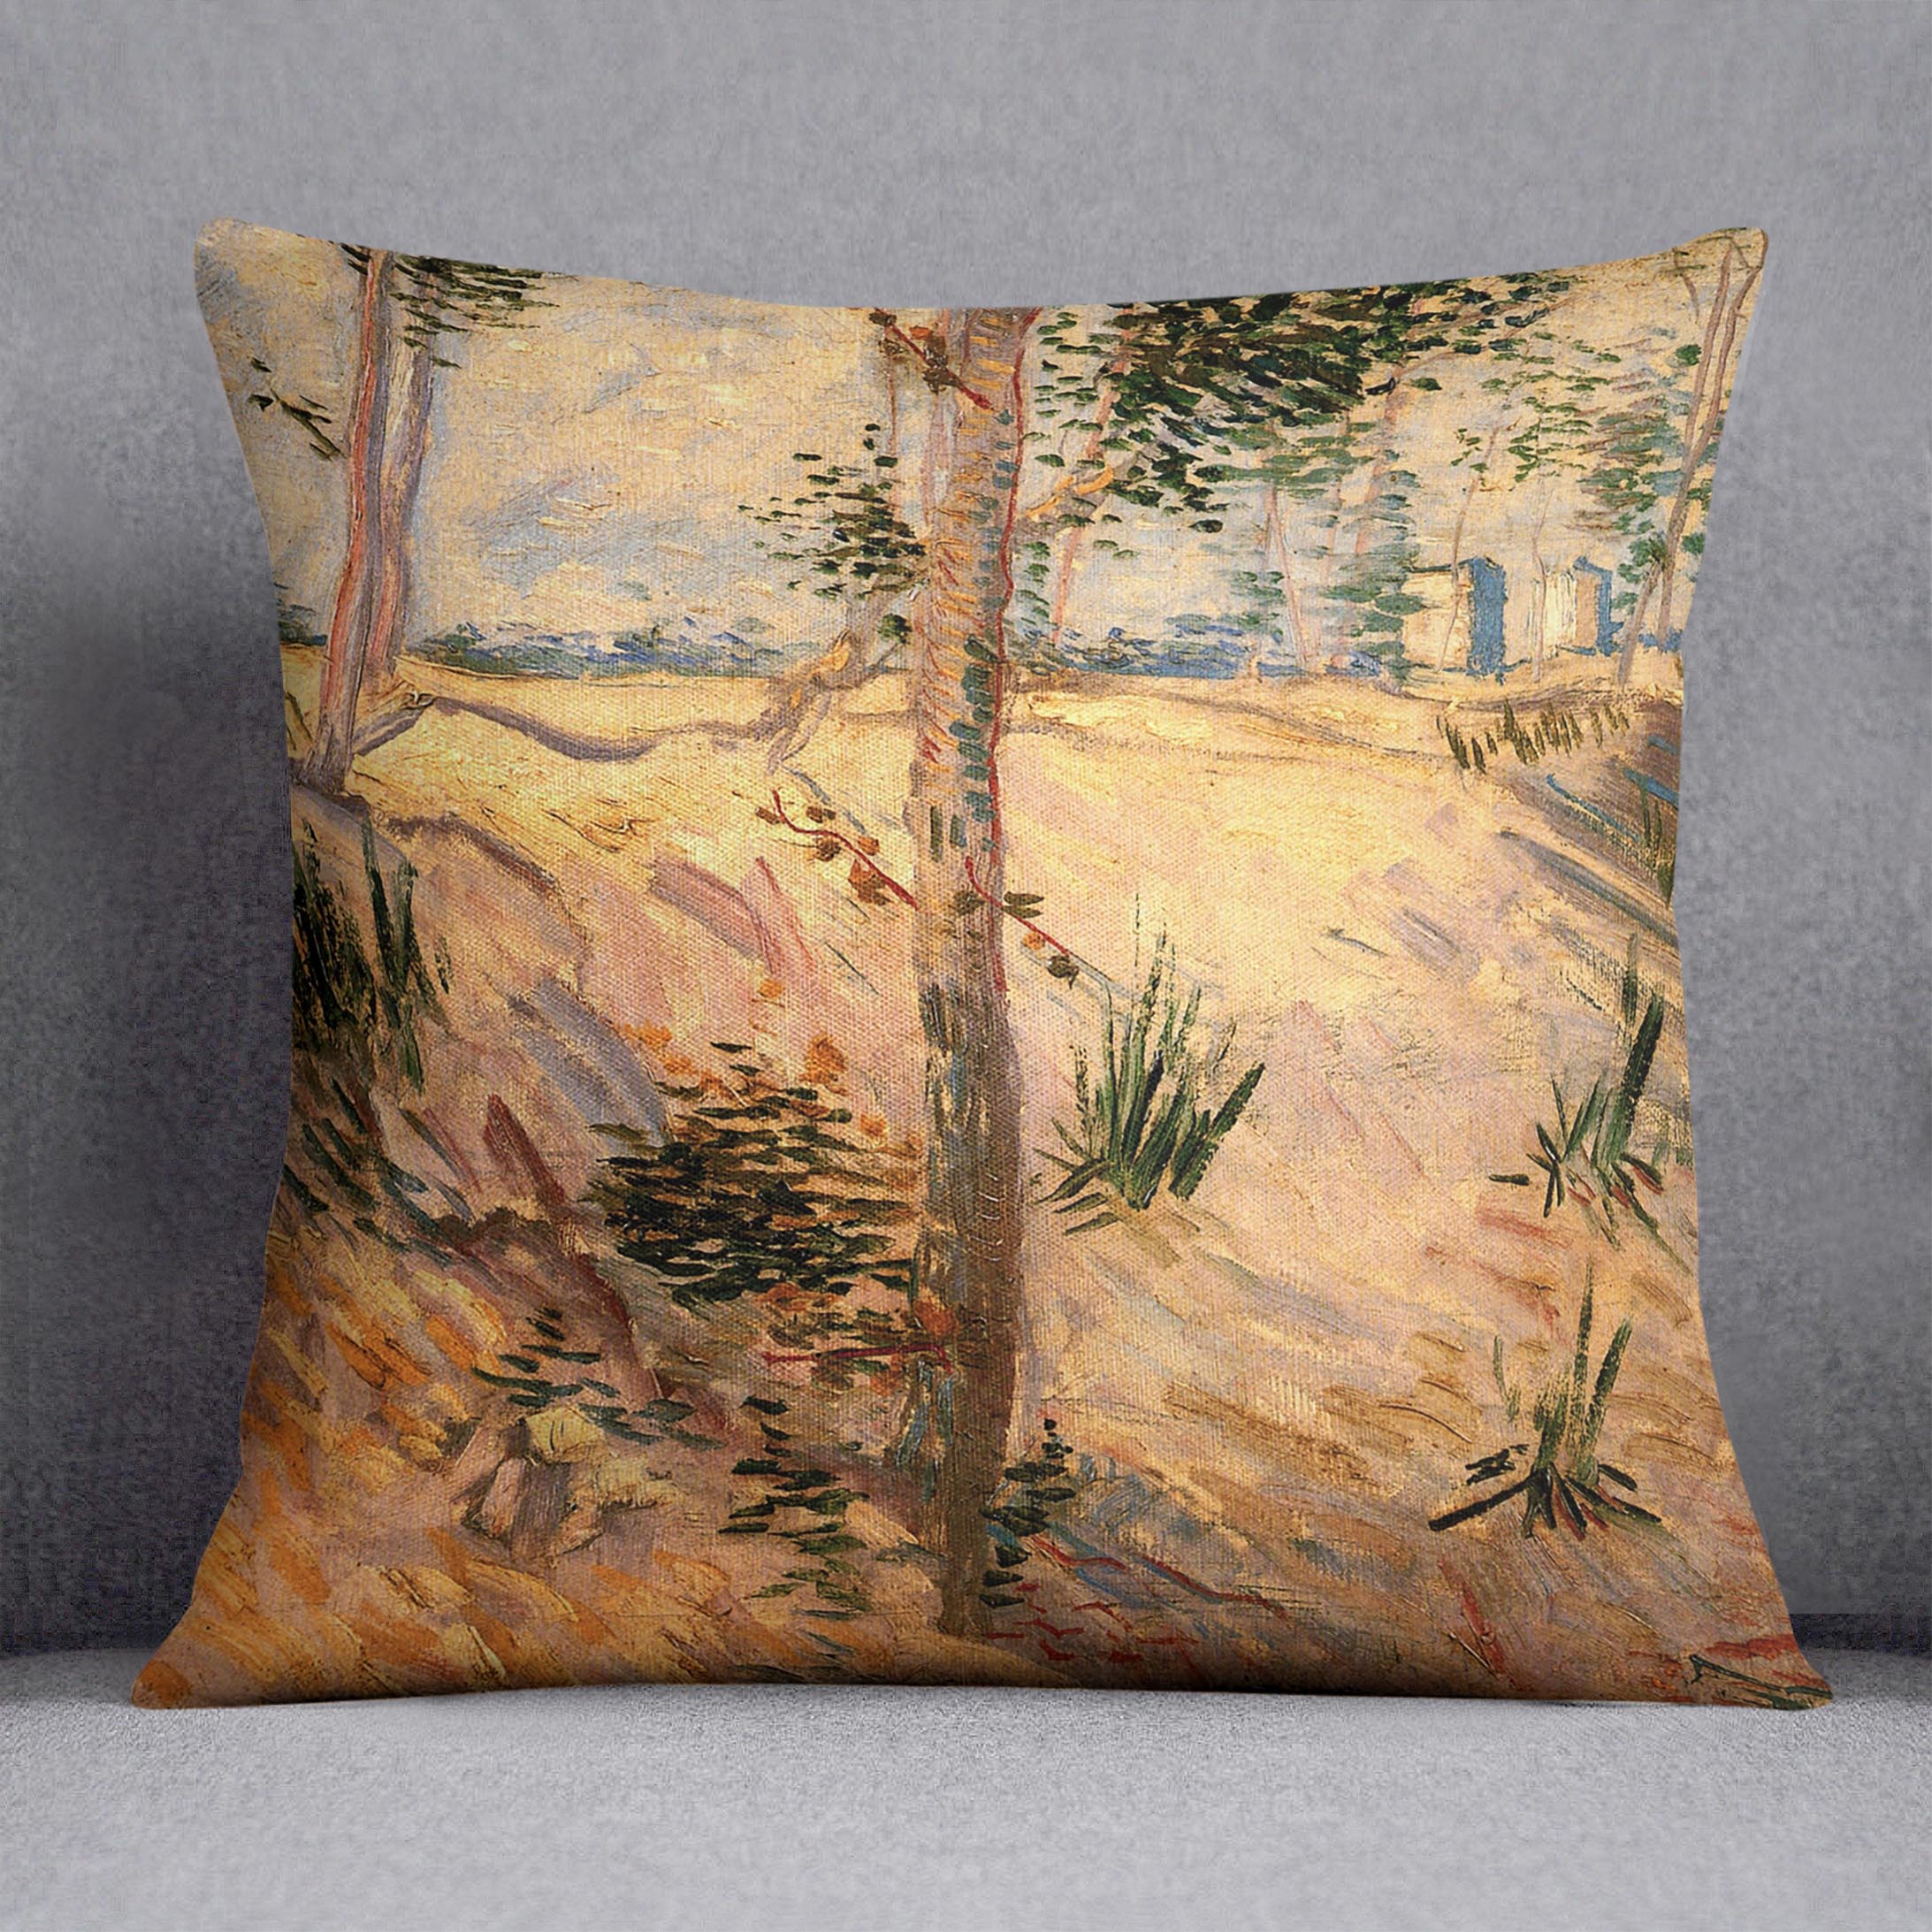 Trees in a Field on a Sunny Day by Van Gogh Cushion